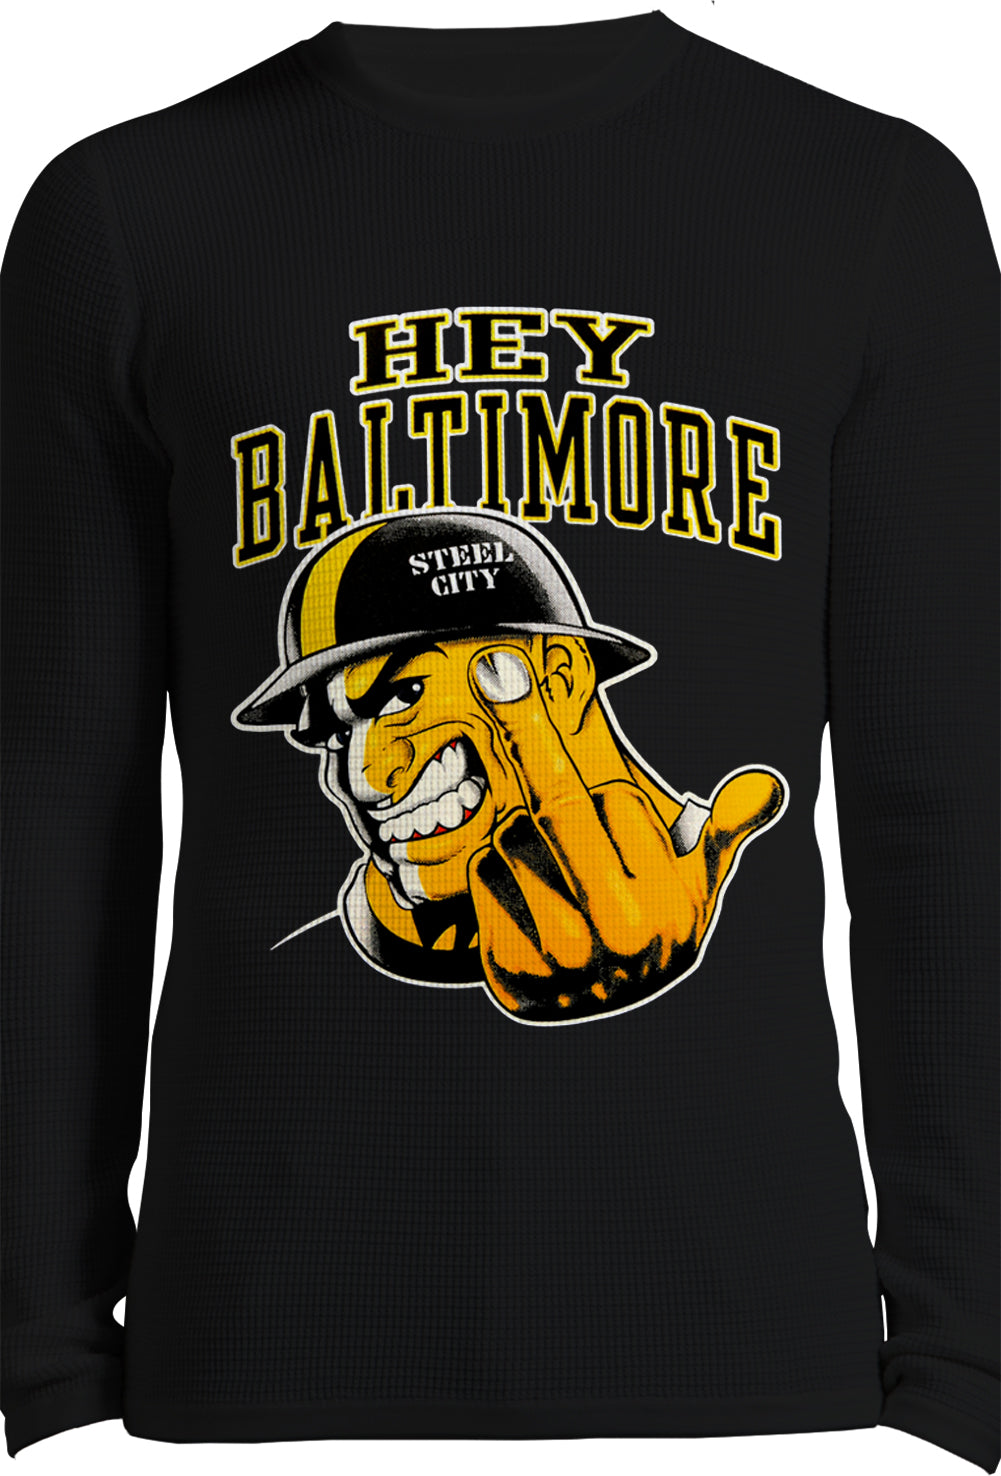 Hey Baltimore - Pittsburgh guy with Middle Finger Thermal Long Sleeve Shirt